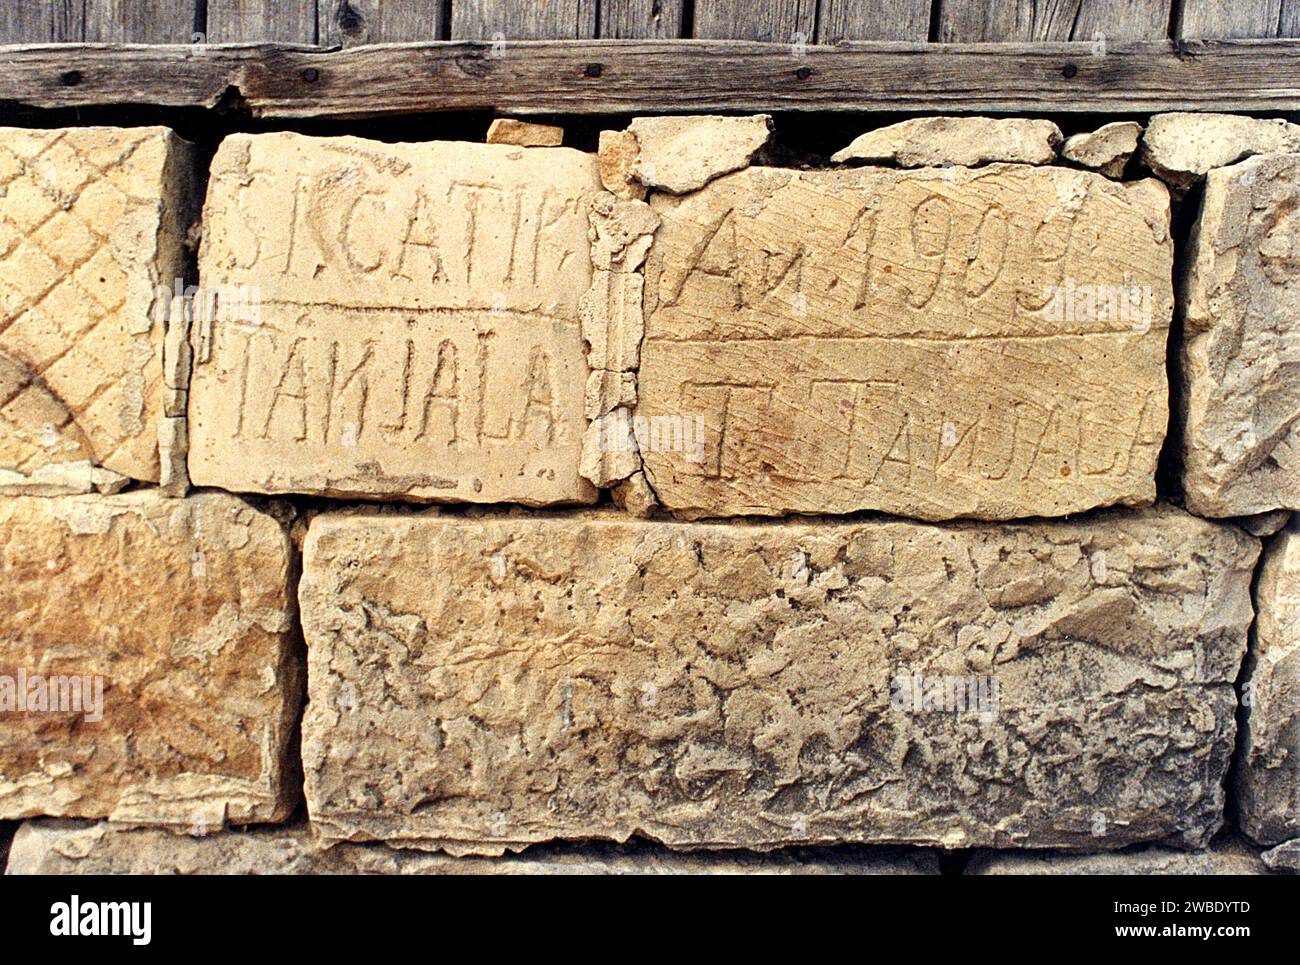 Colacu, Vrancea County, Romania, approx. 1990. Carved inscription with the family name Tanjala and the construction year 1909 on the foundation of a local house. Stock Photo